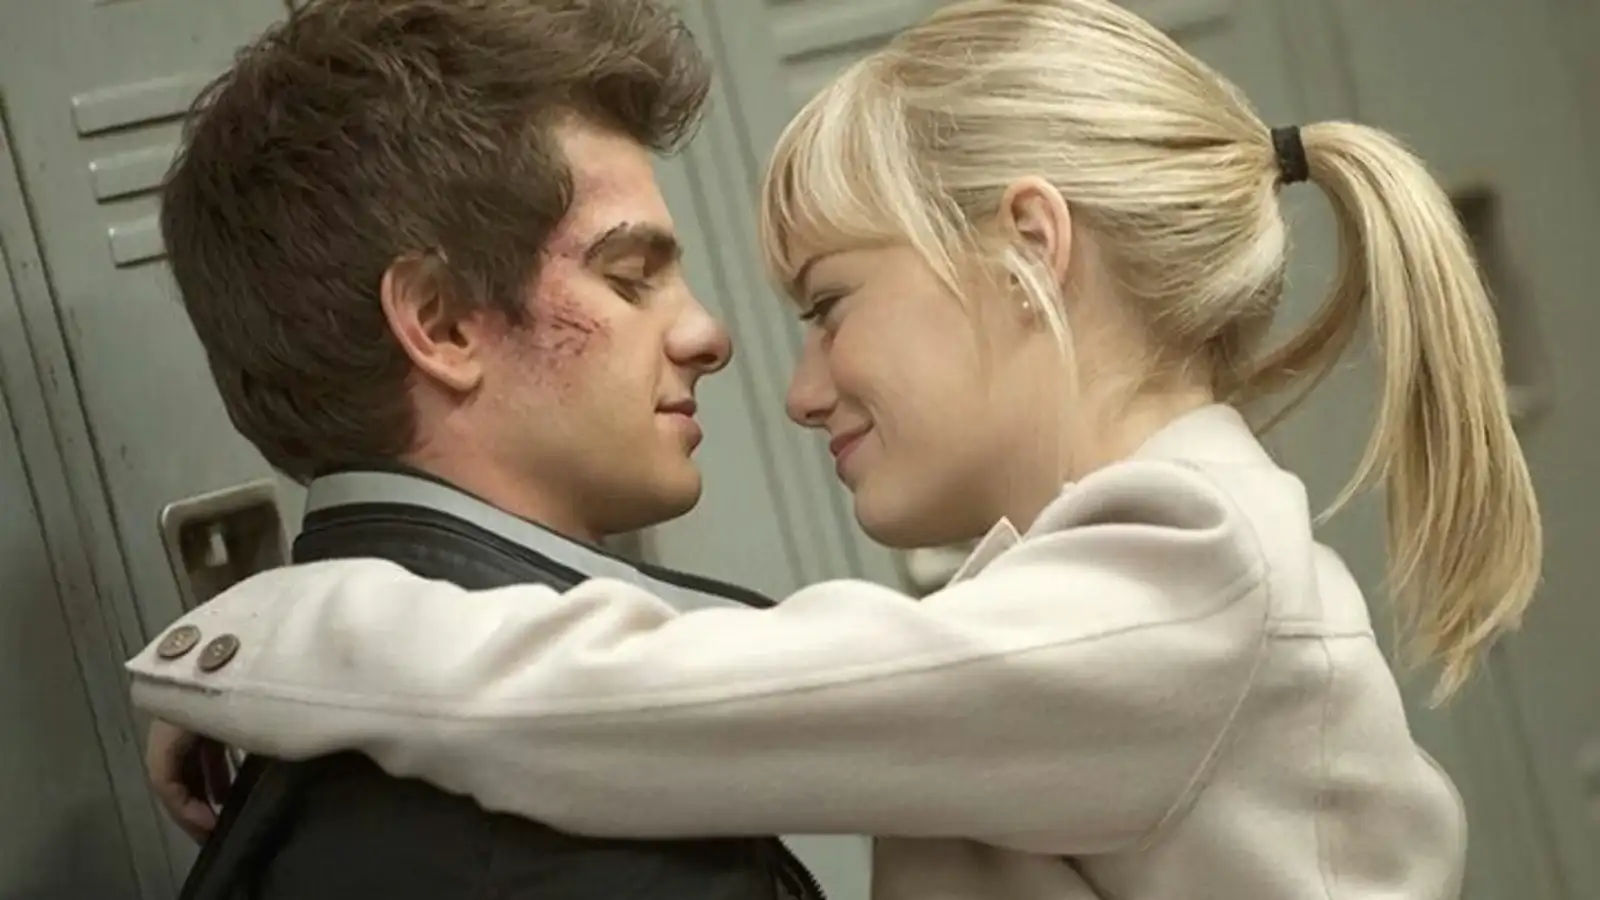 Andrew Garfield and Emma Stone Could Save the Romantic Comedy